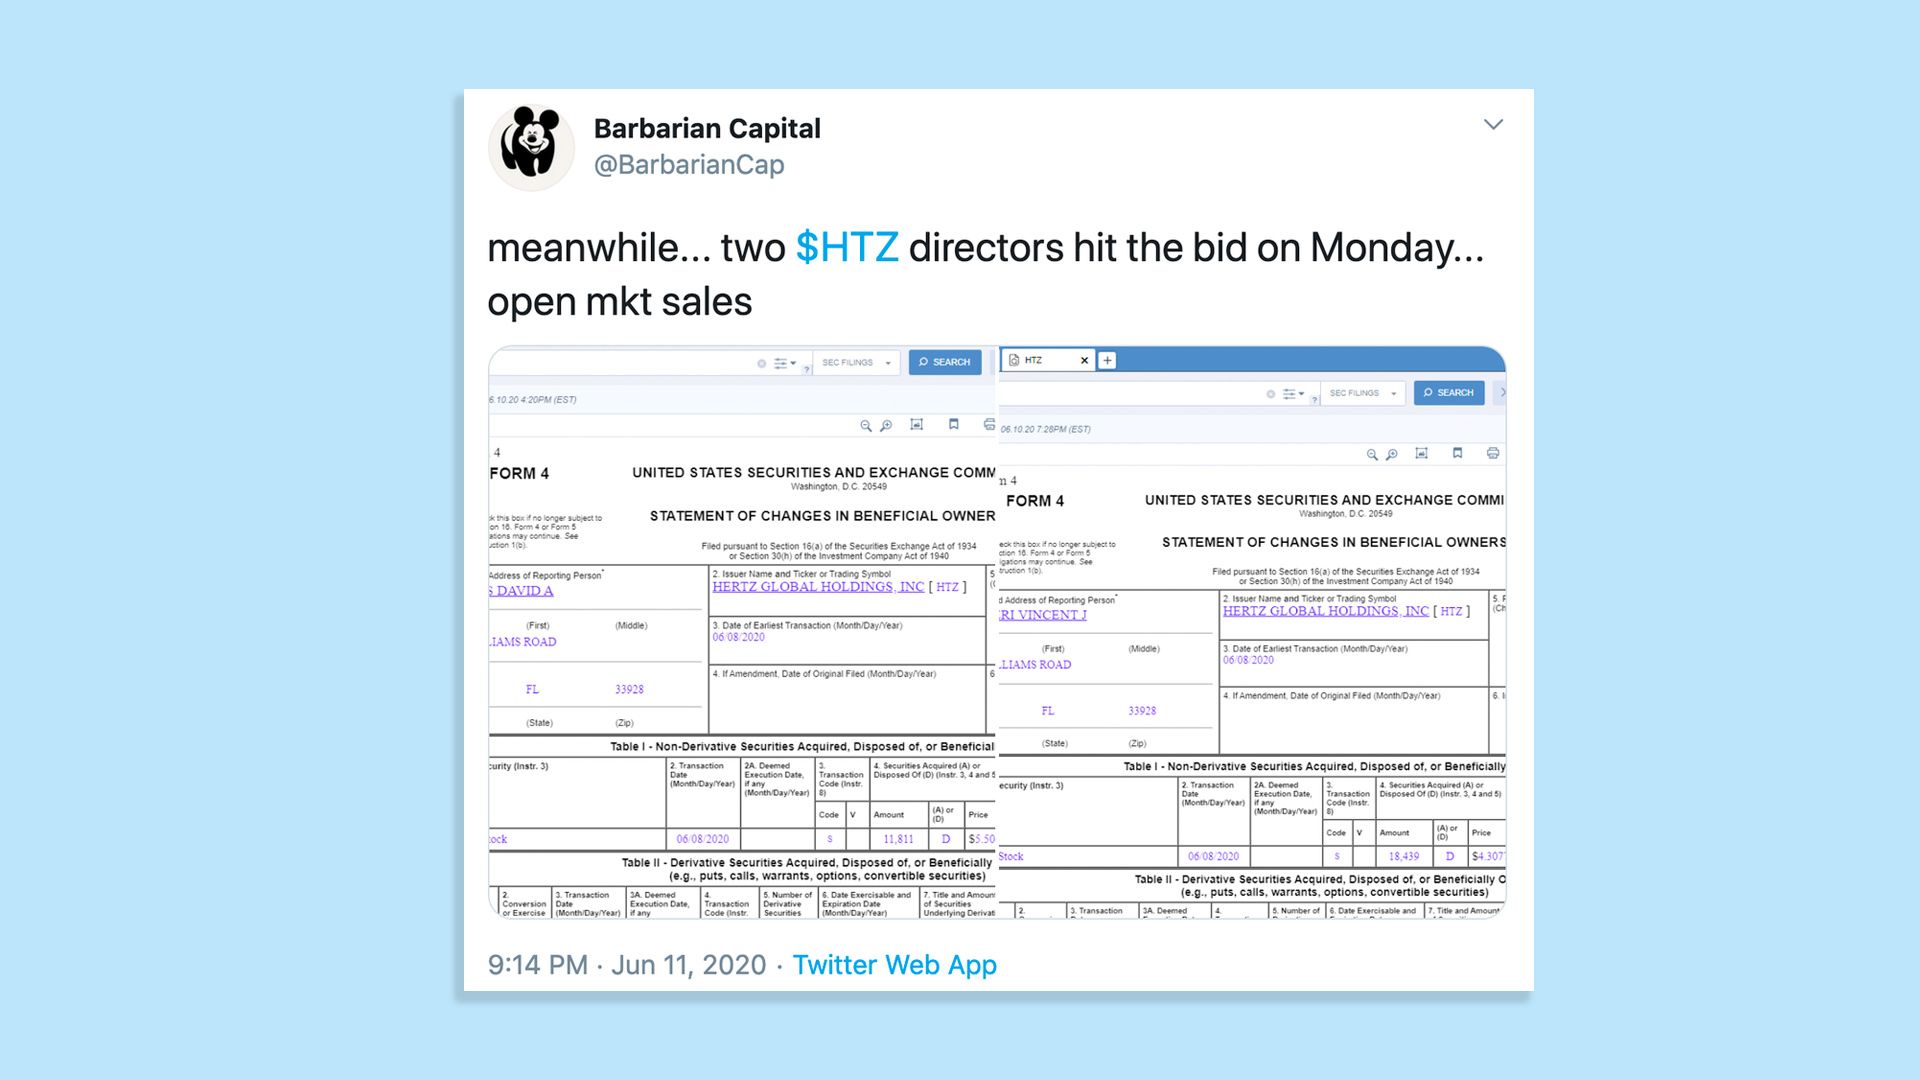 A tweet from Barbarian Capital that shows documents of Hertz filing for bankruptcy